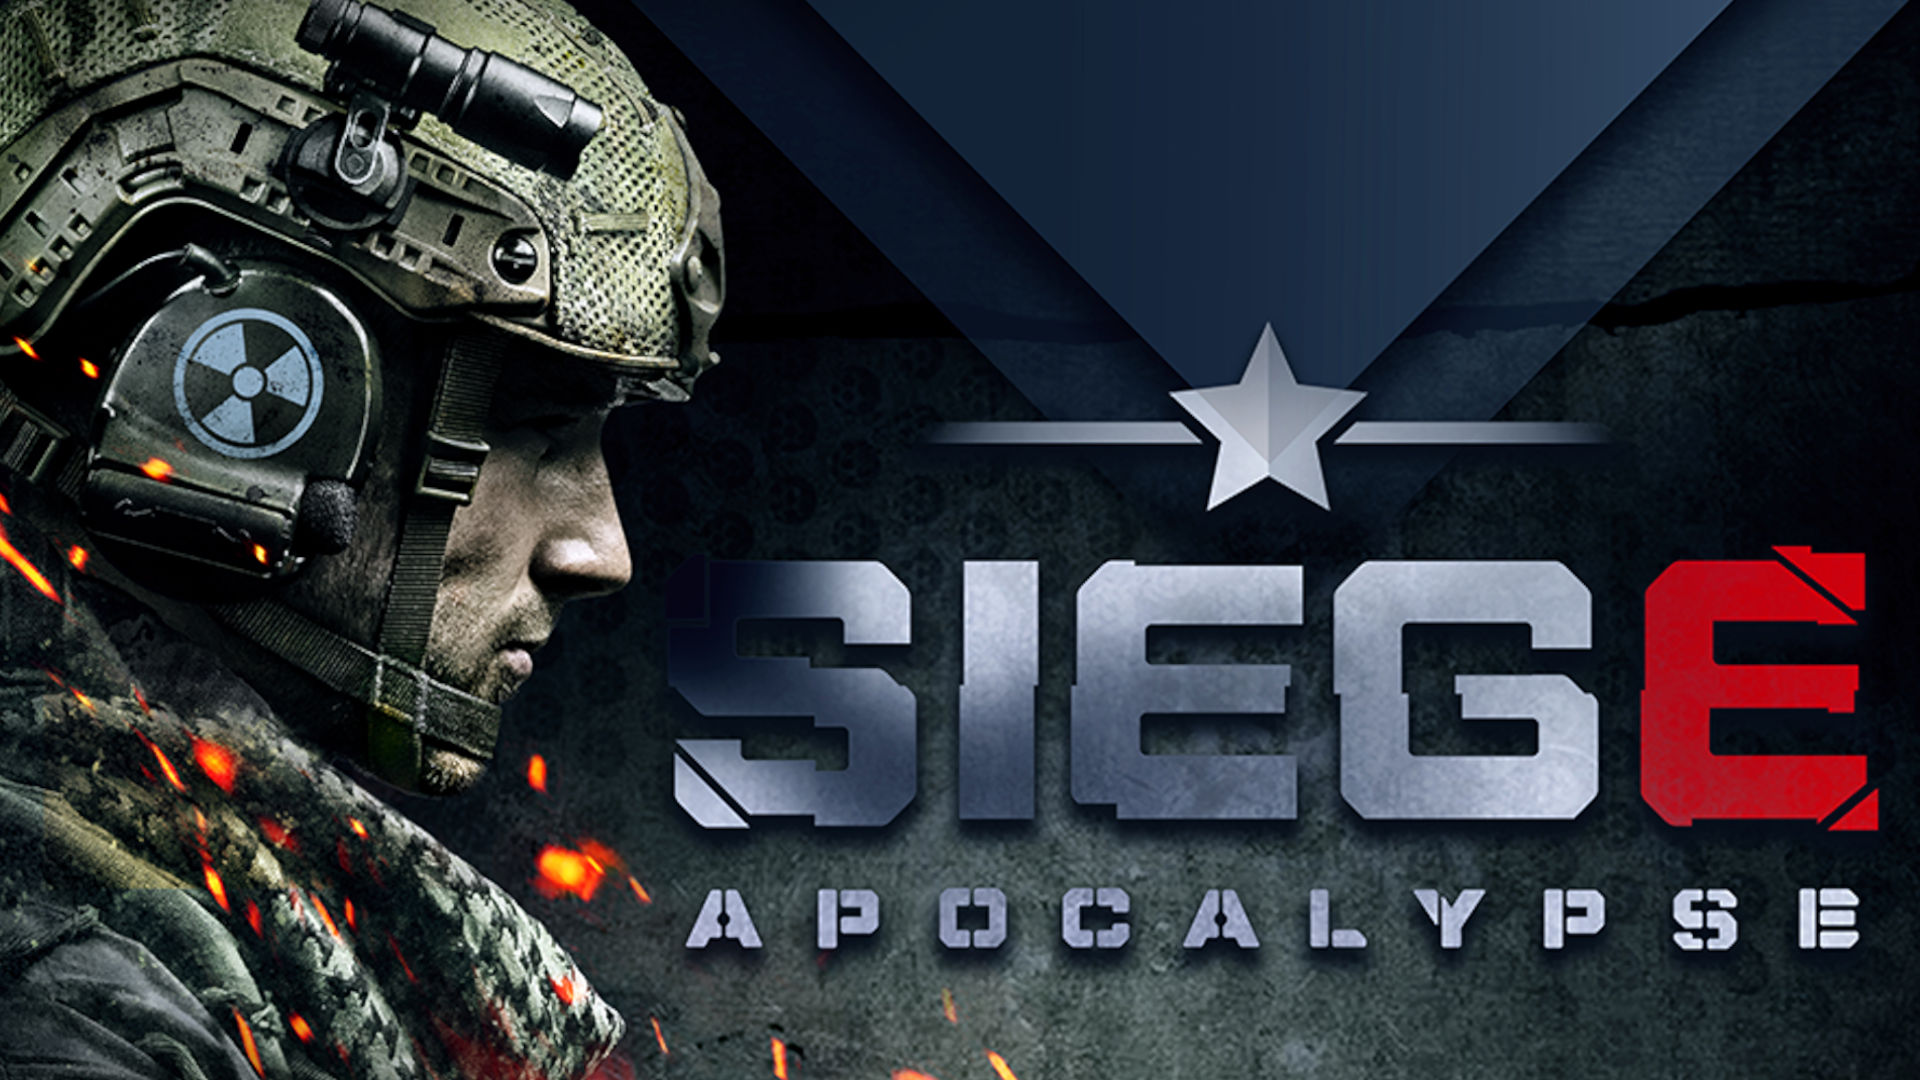 Siege Apocalypse promotional art showing the game title and a soldier